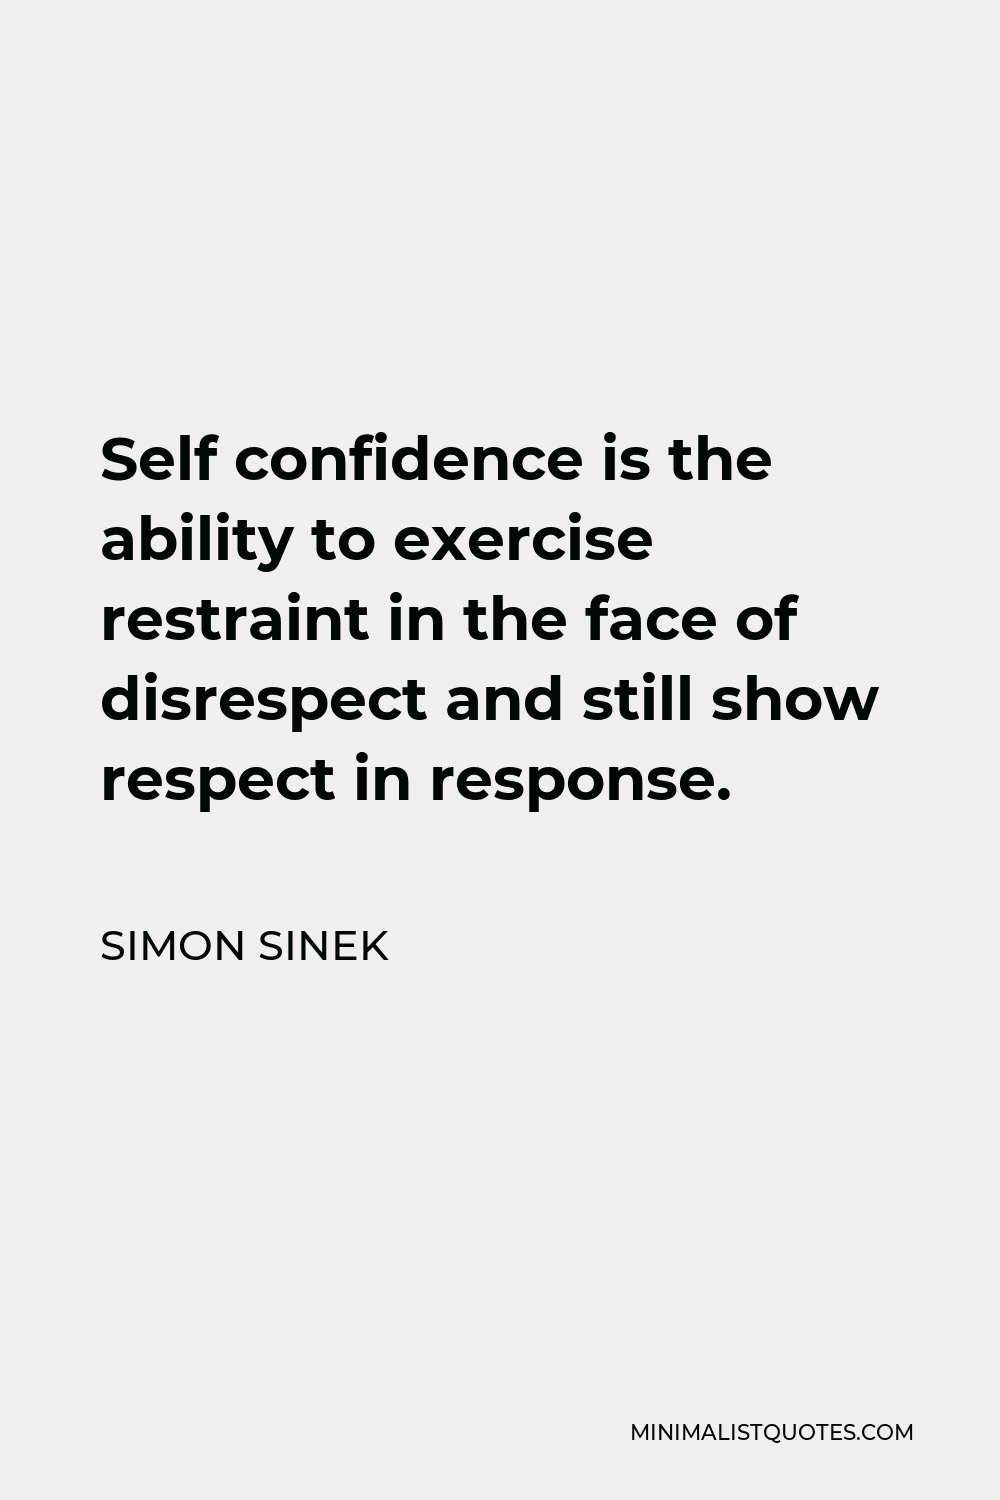 Simon Sinek Quote - Self confidence is the ability to exercise restraint in the face of disrespect and still show respect in response.